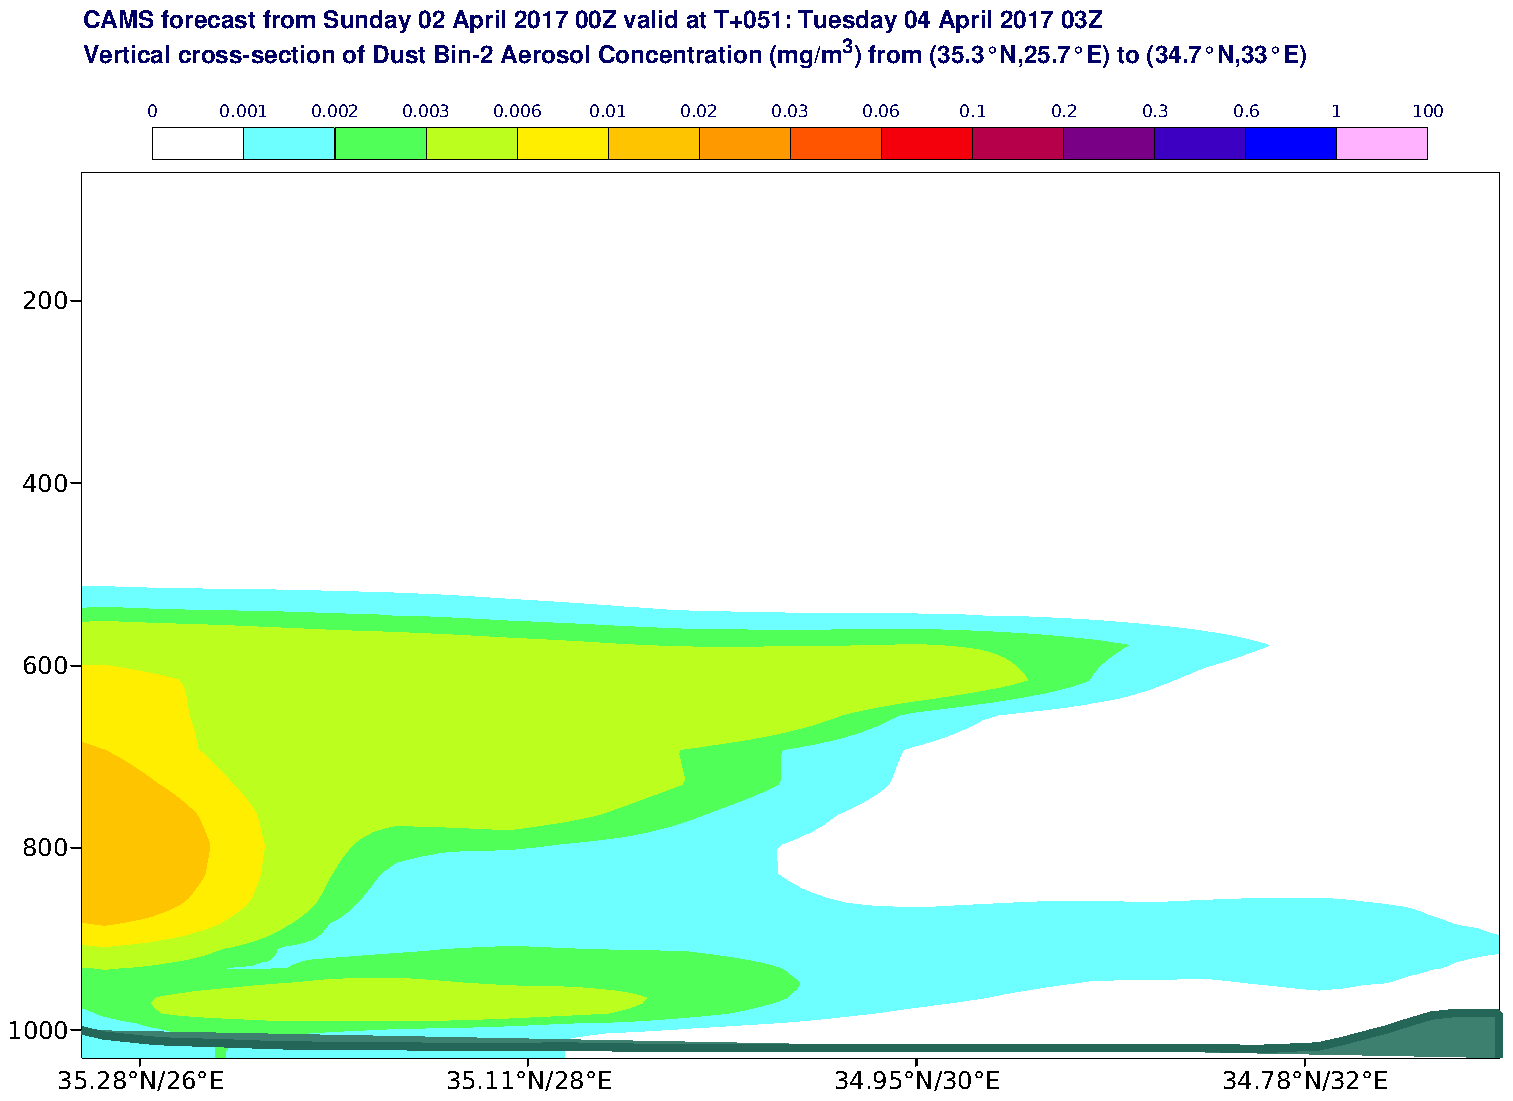 Vertical cross-section of Dust Bin-2 Aerosol Concentration (mg/m3) valid at T51 - 2017-04-04 03:00